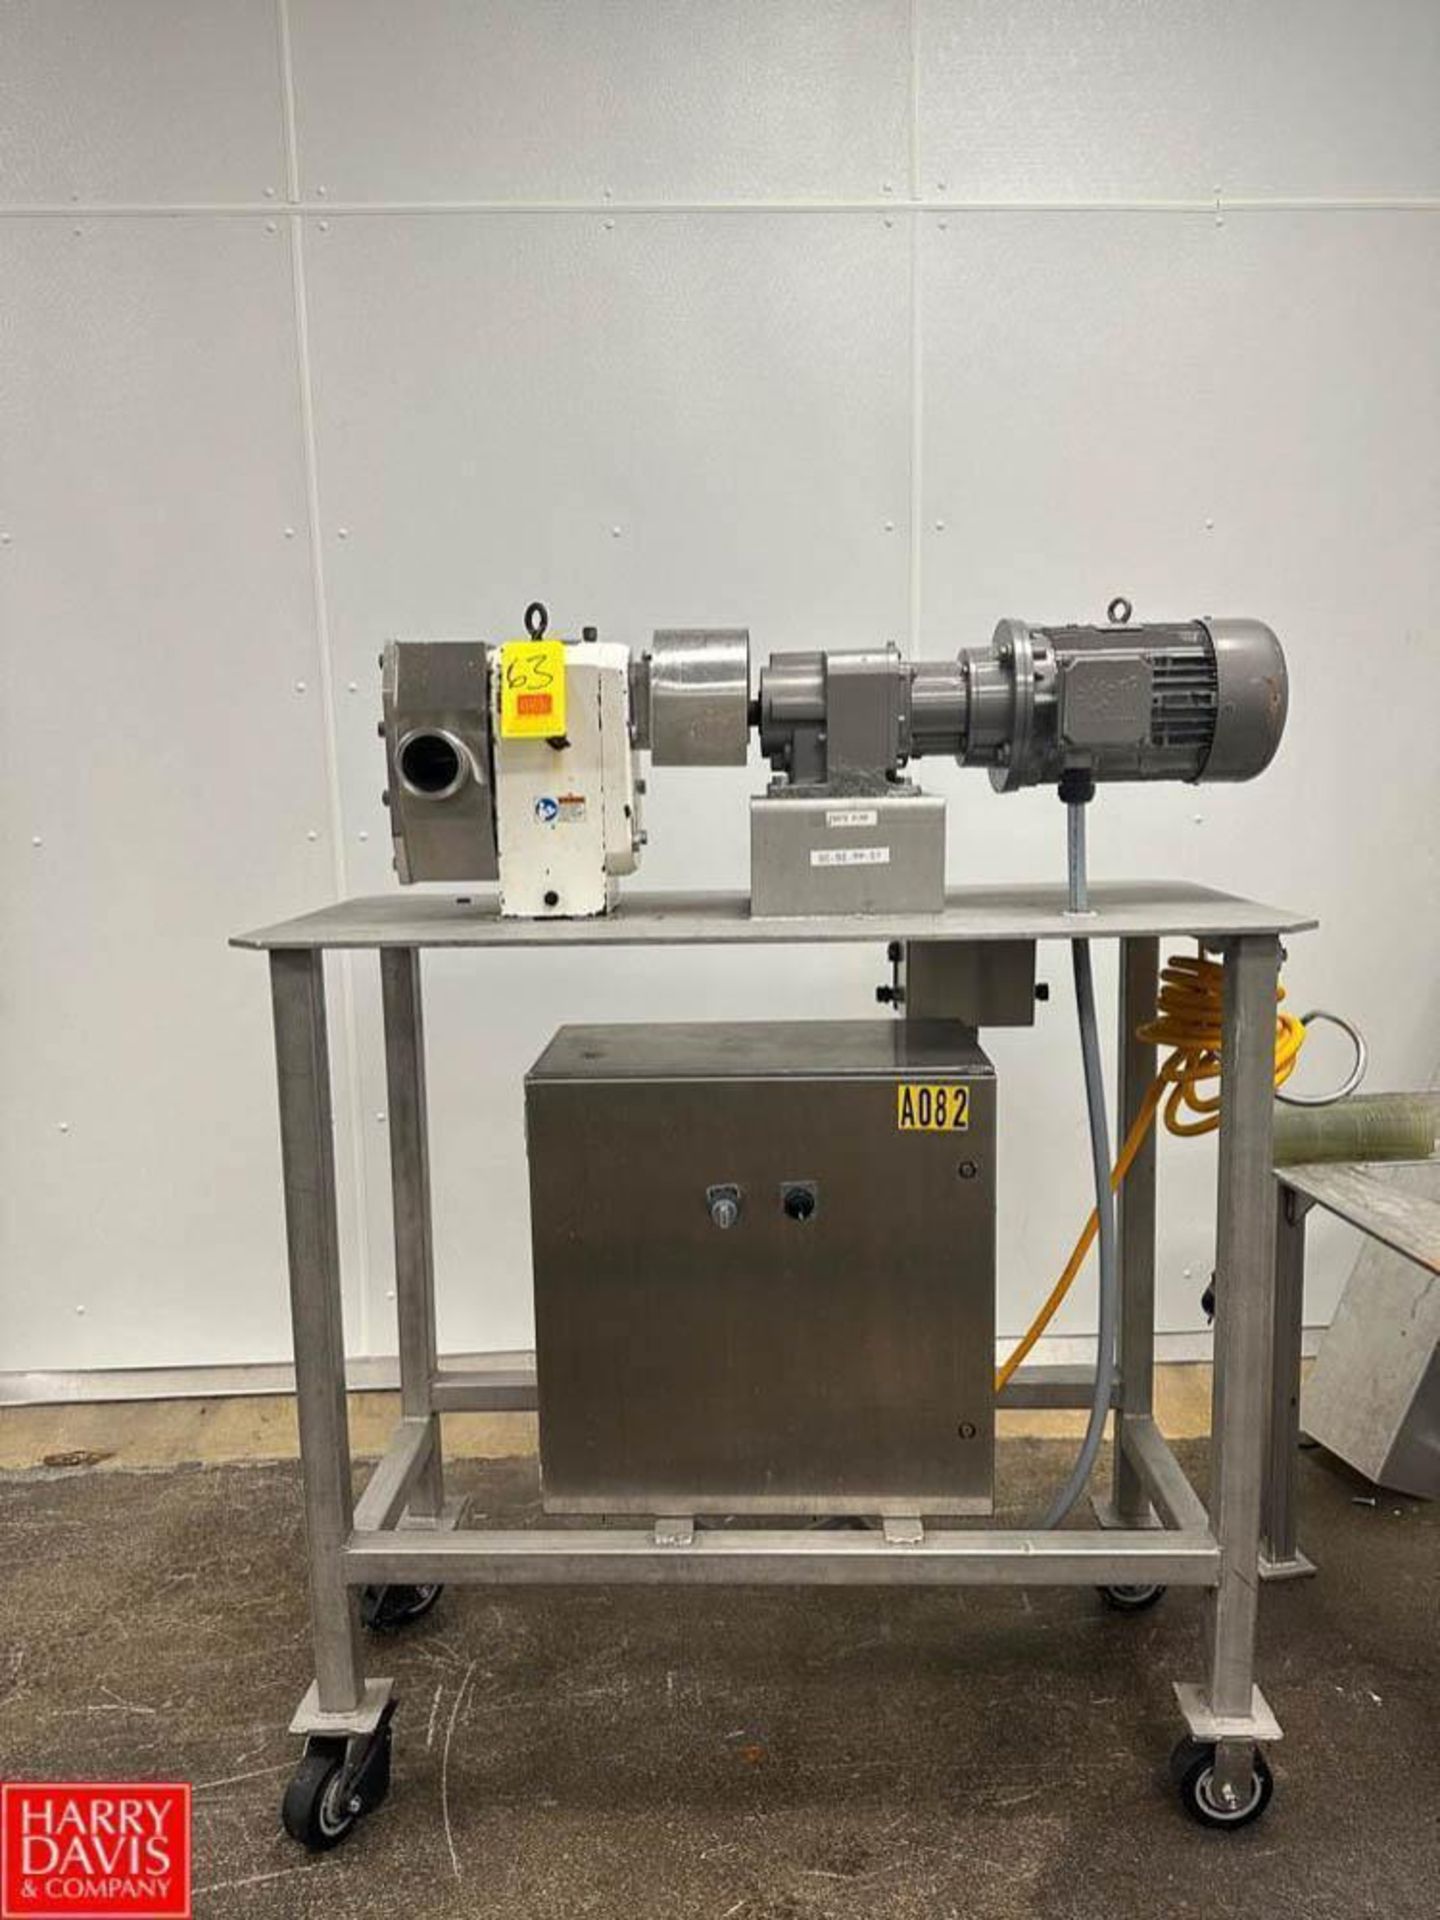 SPX Positive Displacement Pump Size R6, S/N: 1000003759612 with Nord 5 HP Motor, Schneider